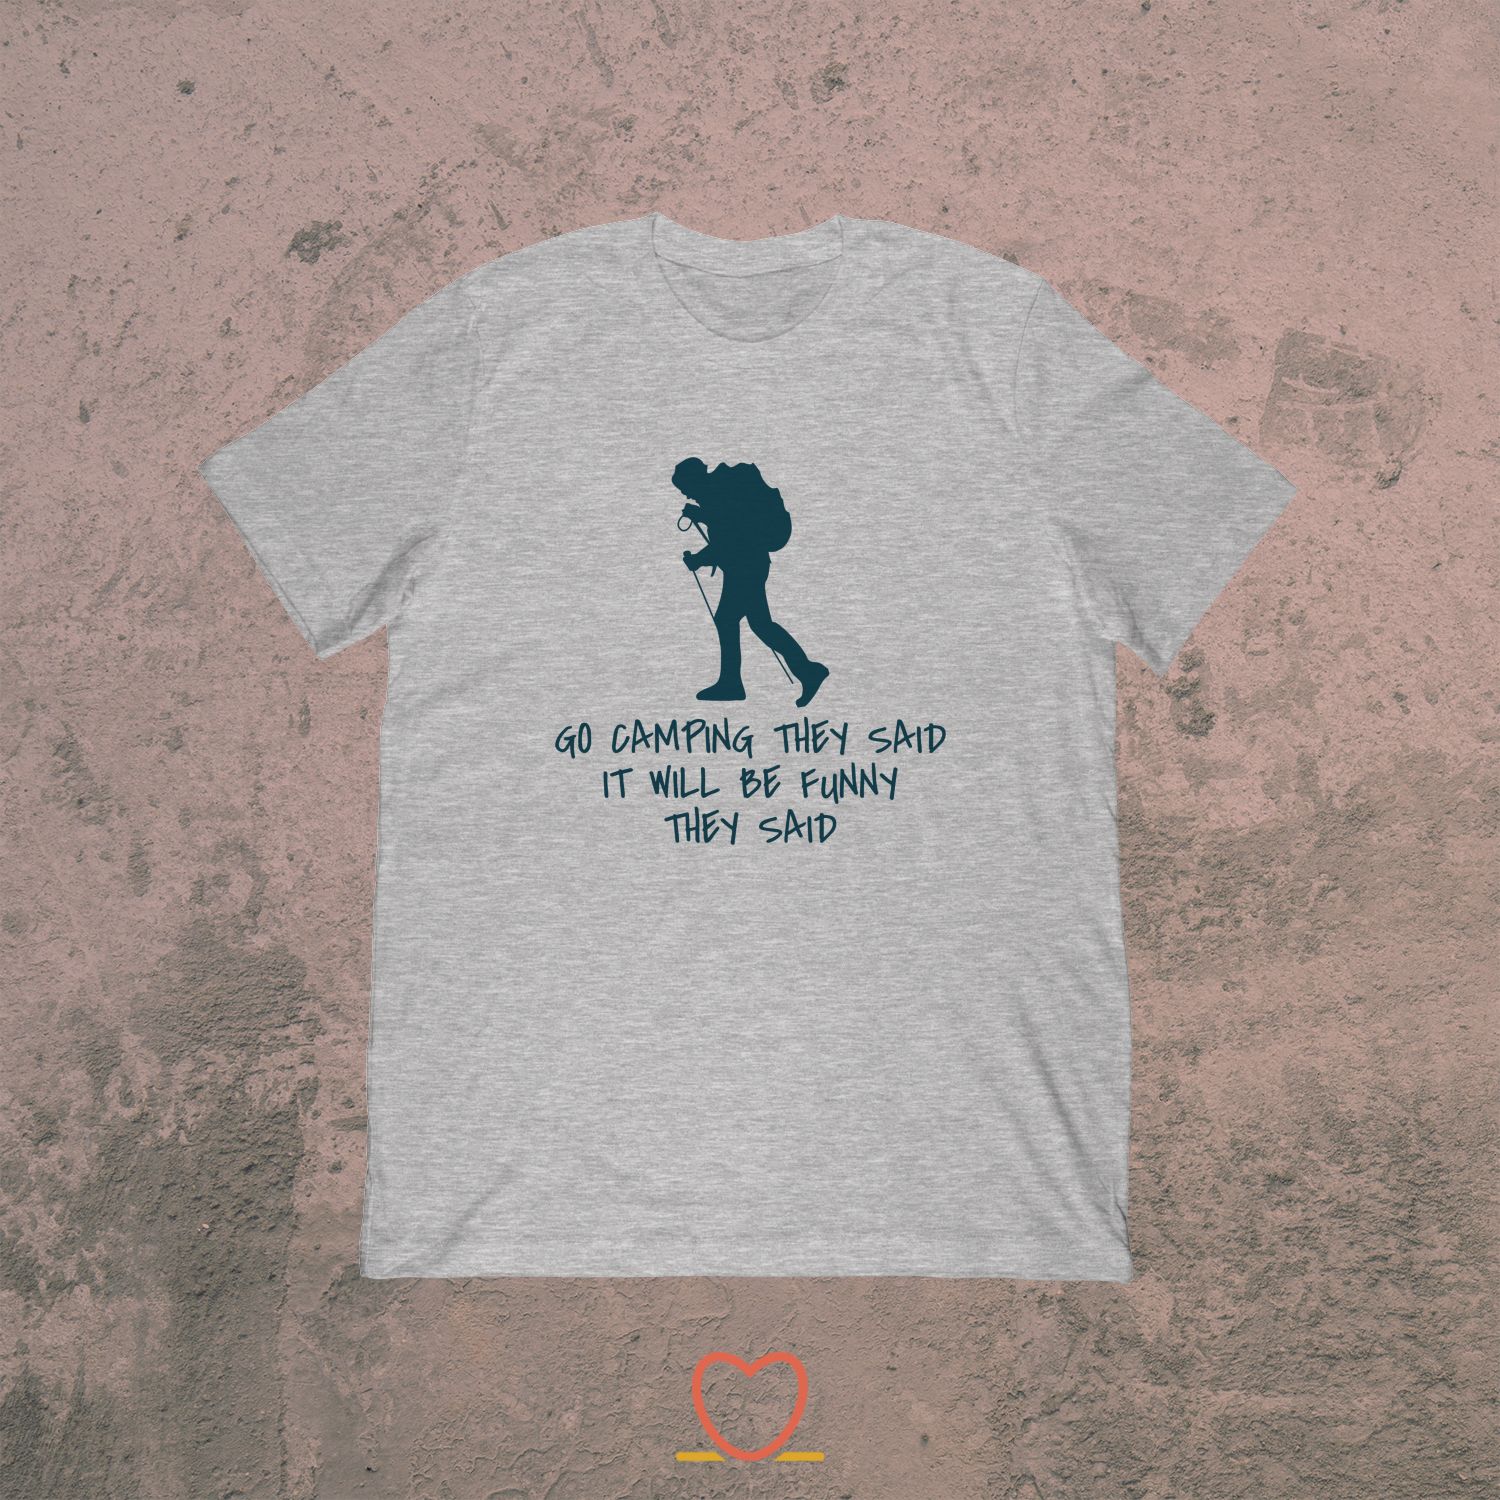 Go Camping They Said – Funny Camping Tee